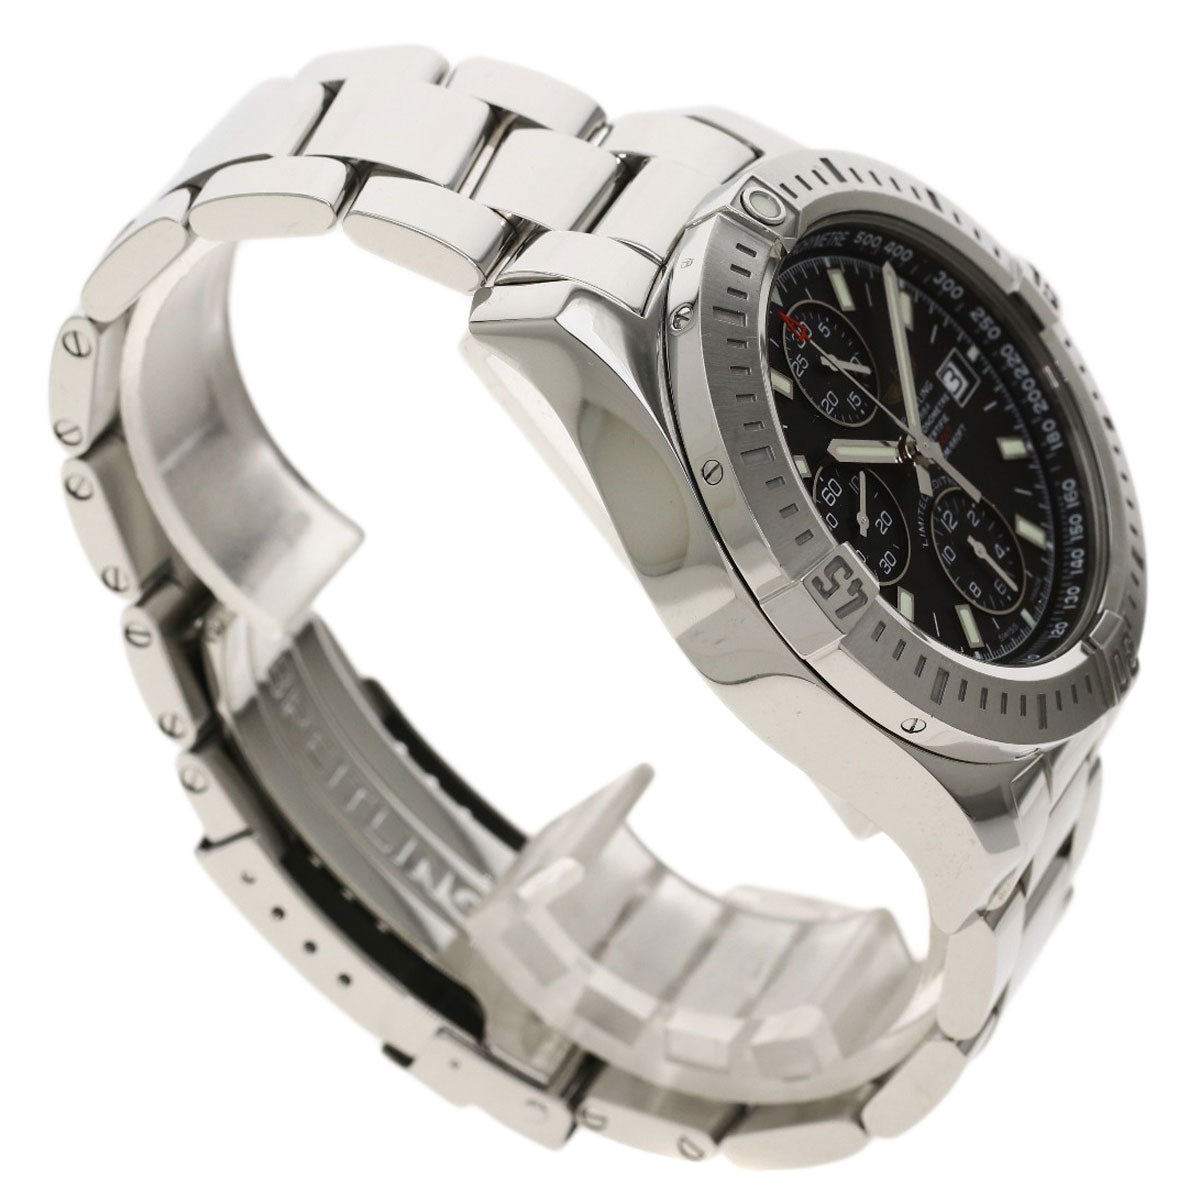 Breitling A13388 Colt Chronograph Japan Limited Stainless Steel Men&#39;s Watch - Japanese-Online-Store (JOS)